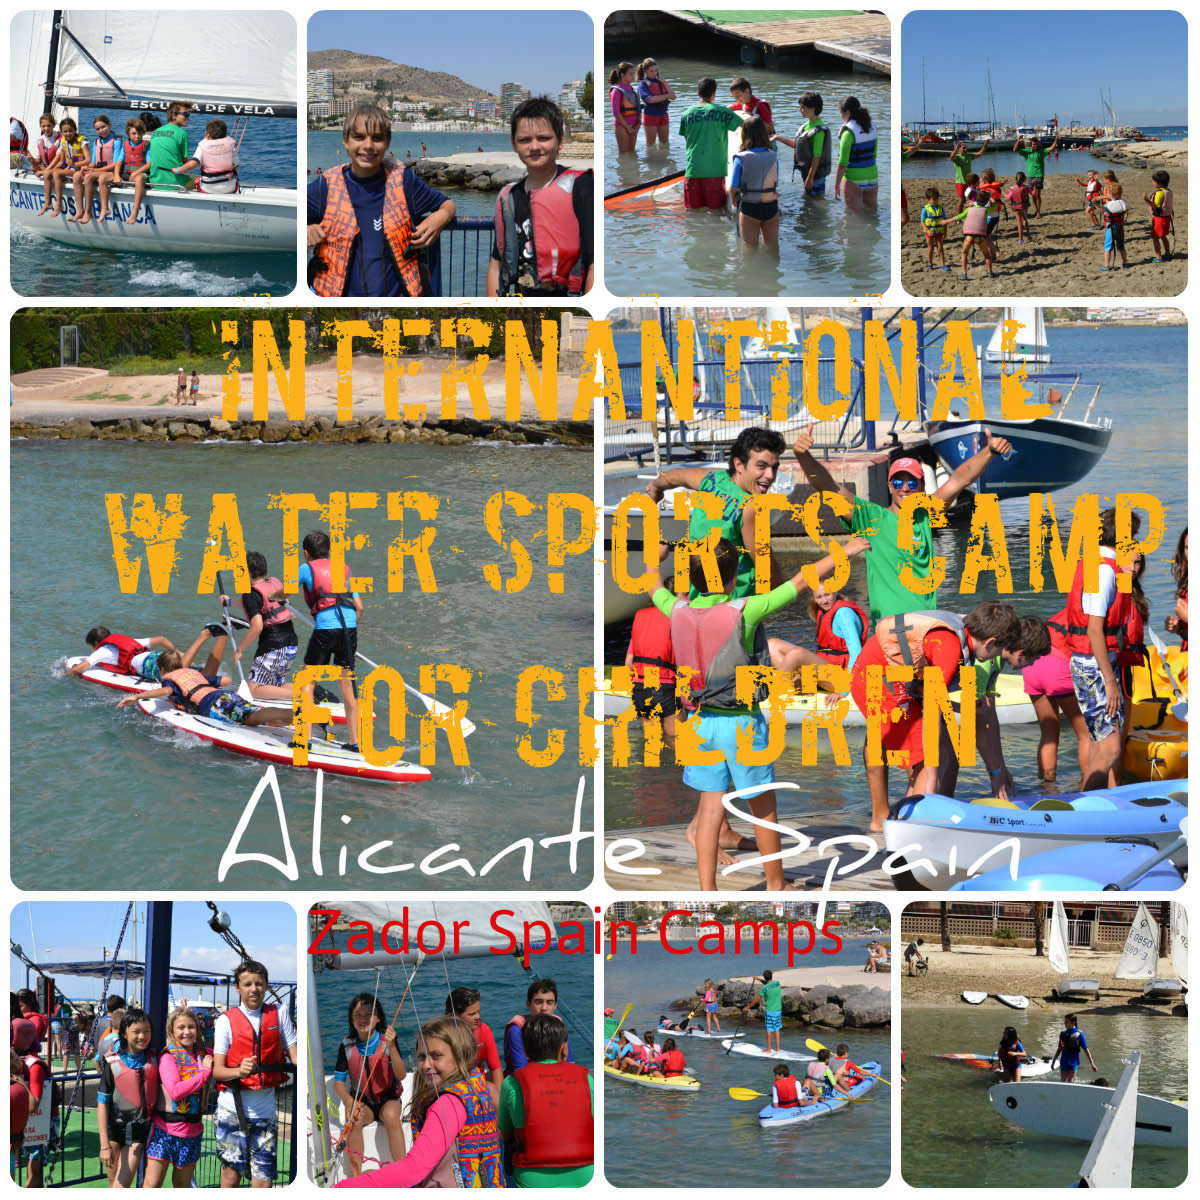 Water Sports Camps for Children Alicante Spain